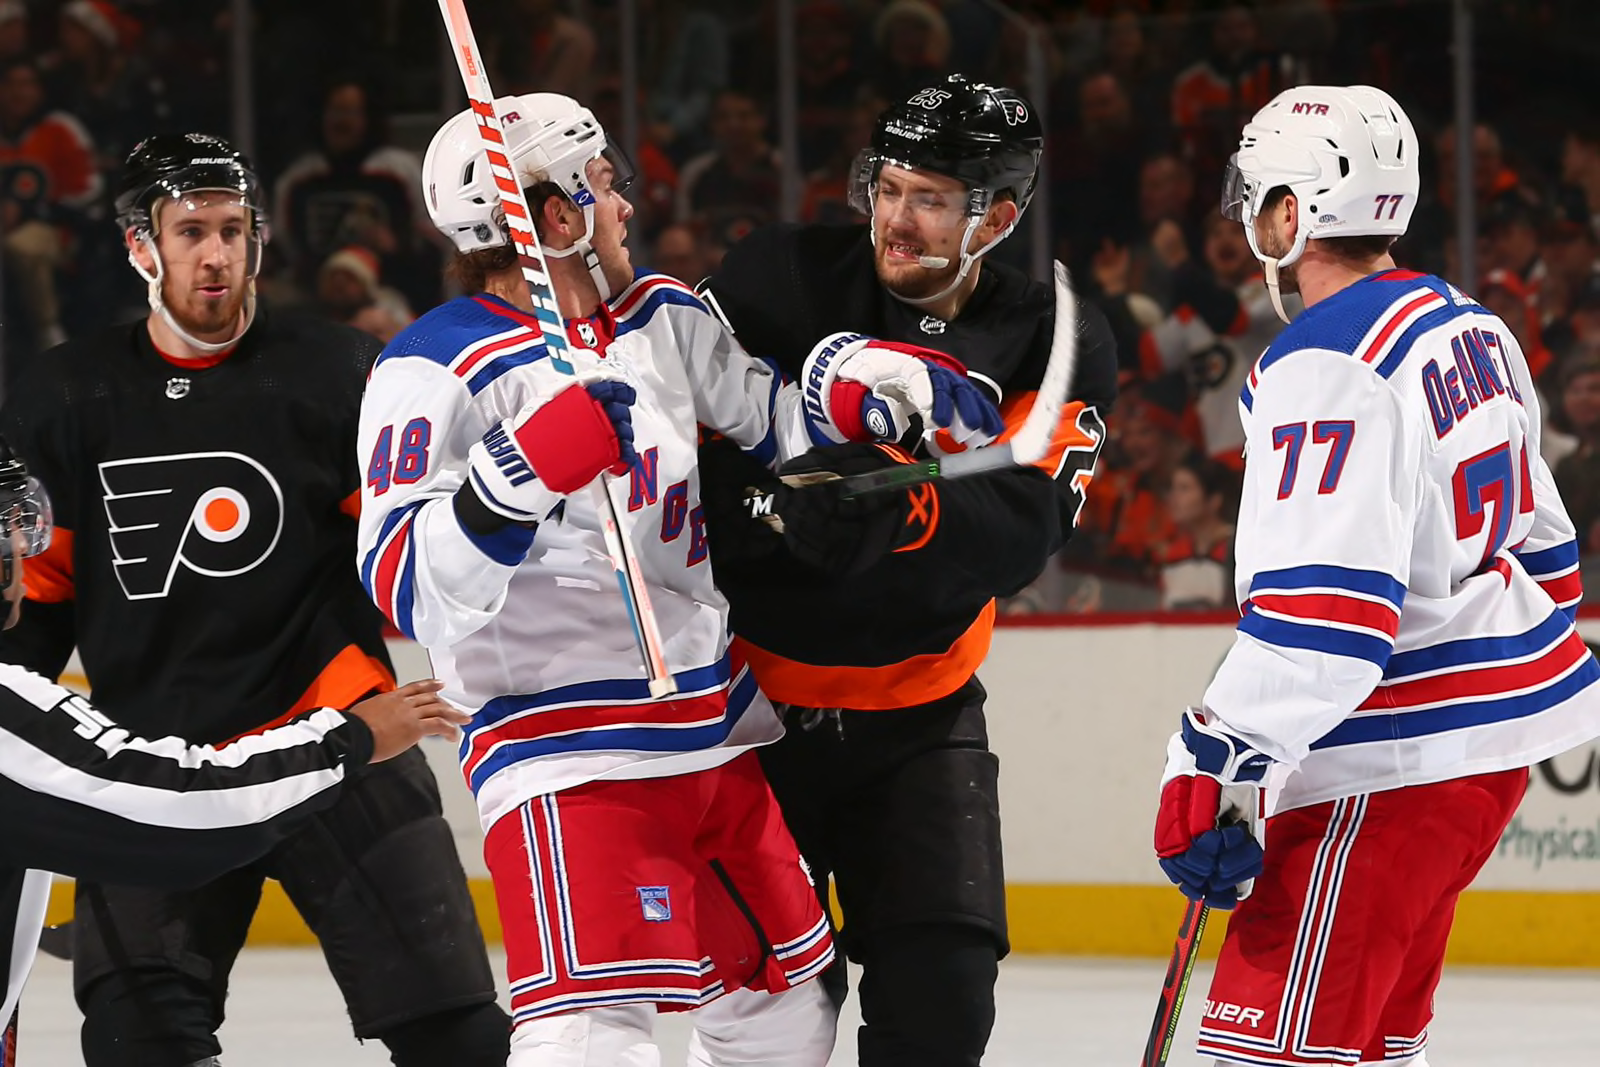 New York Rangers vs Flyers Join the live conversation!